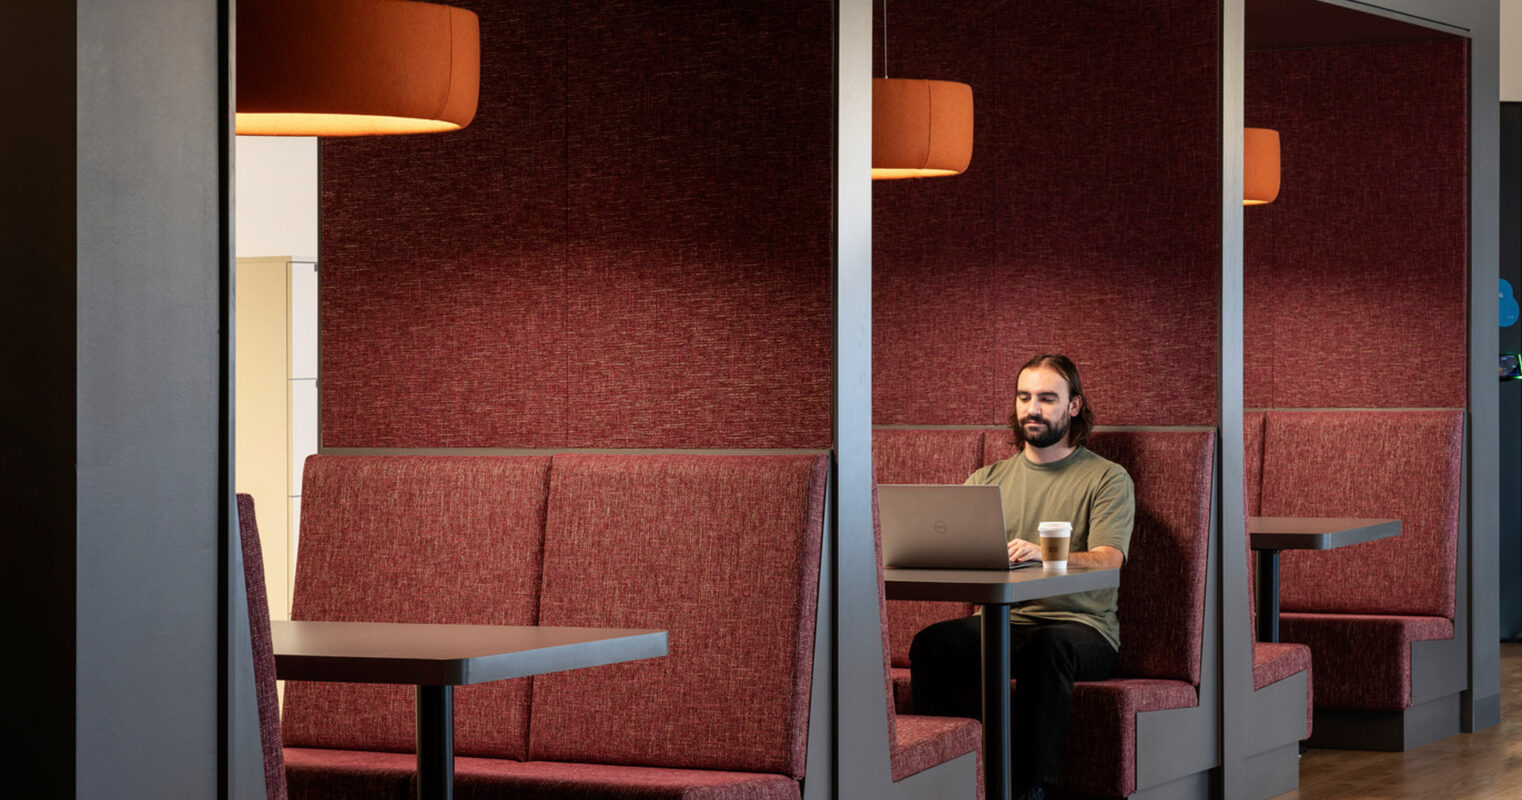 Modern office nook with deep red acoustic panels for privacy, complemented by grey upholstered booth seating. Overhead, pendant lighting casts a warm glow on the workspace, enhancing a cozy, productive ambiance.